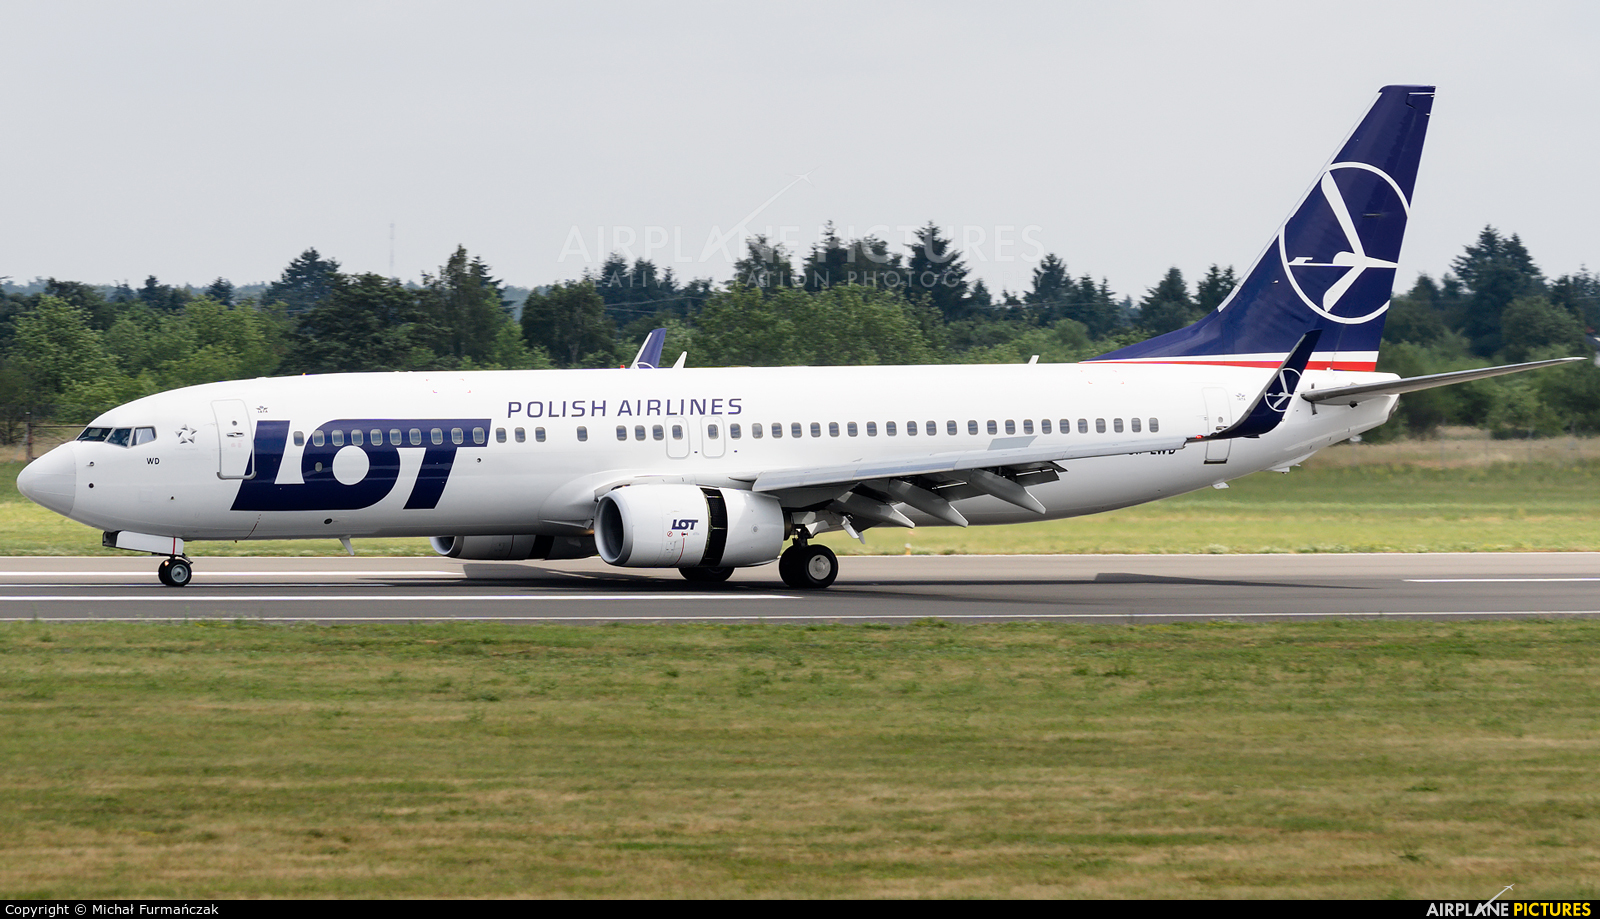 LOT - Polish Airlines SP-LWD aircraft at Poznań - Ławica